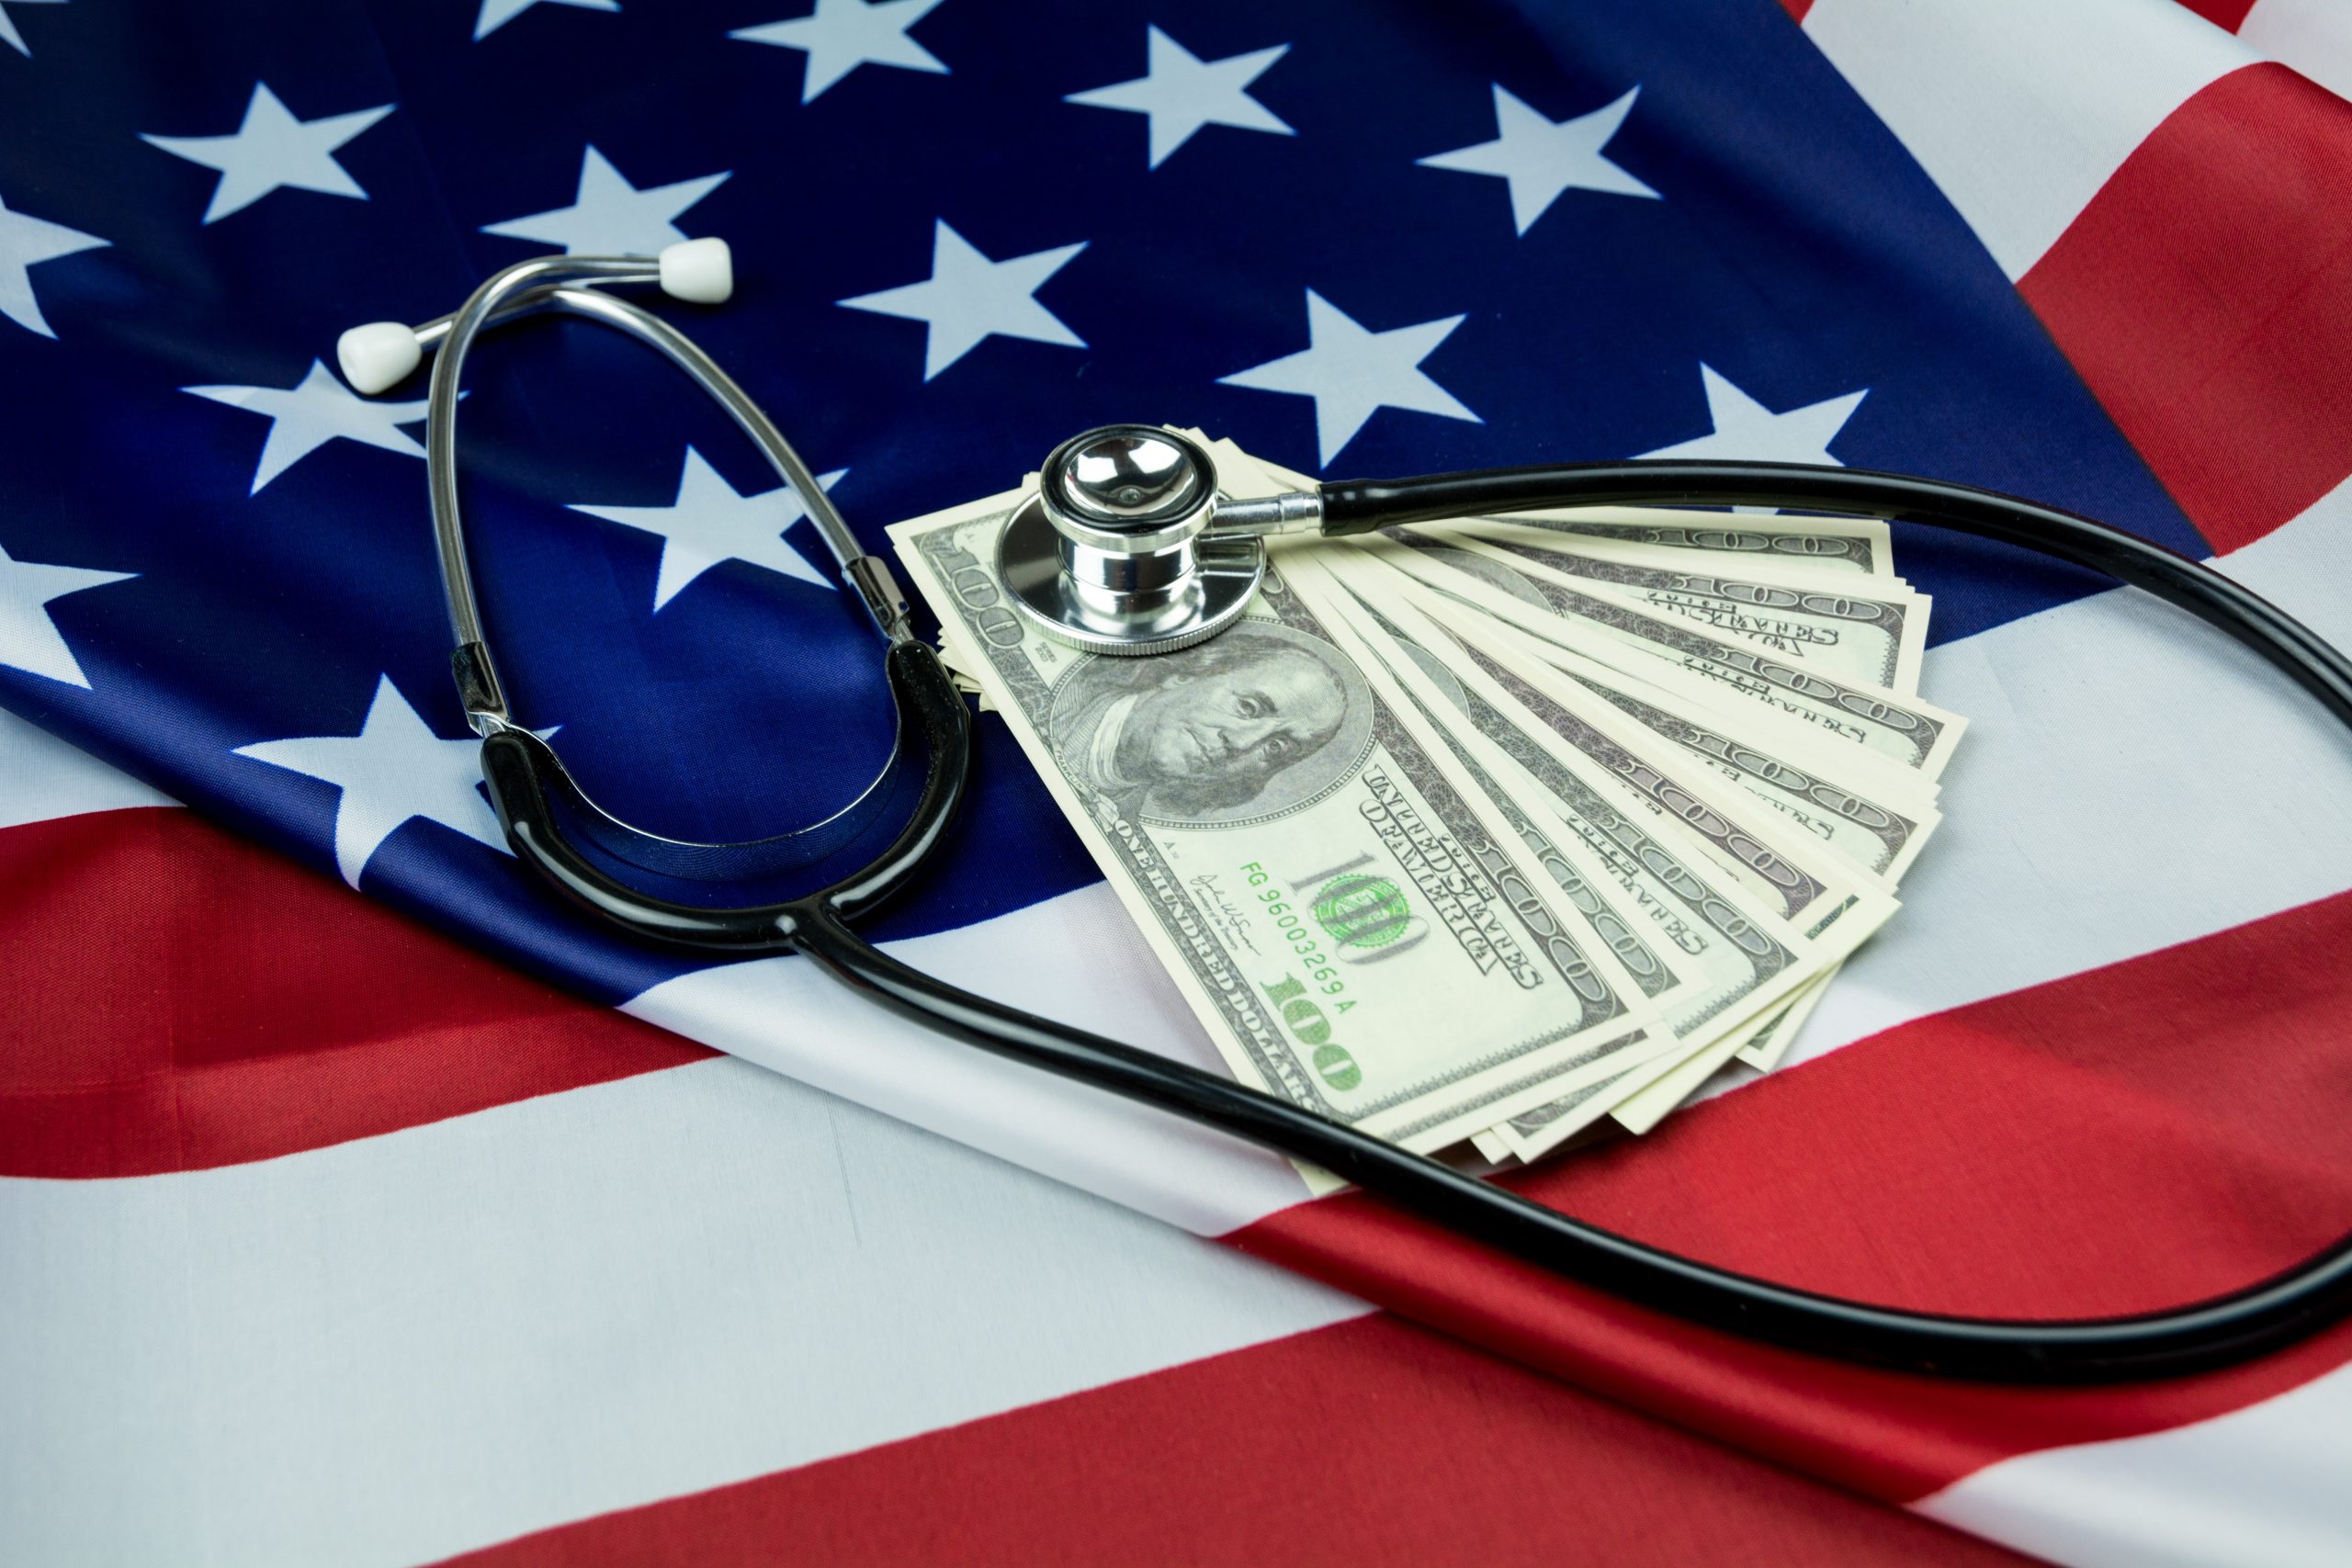 Where Does the Money Go? Why the “Affordable” Care Act isn’t really affordable.